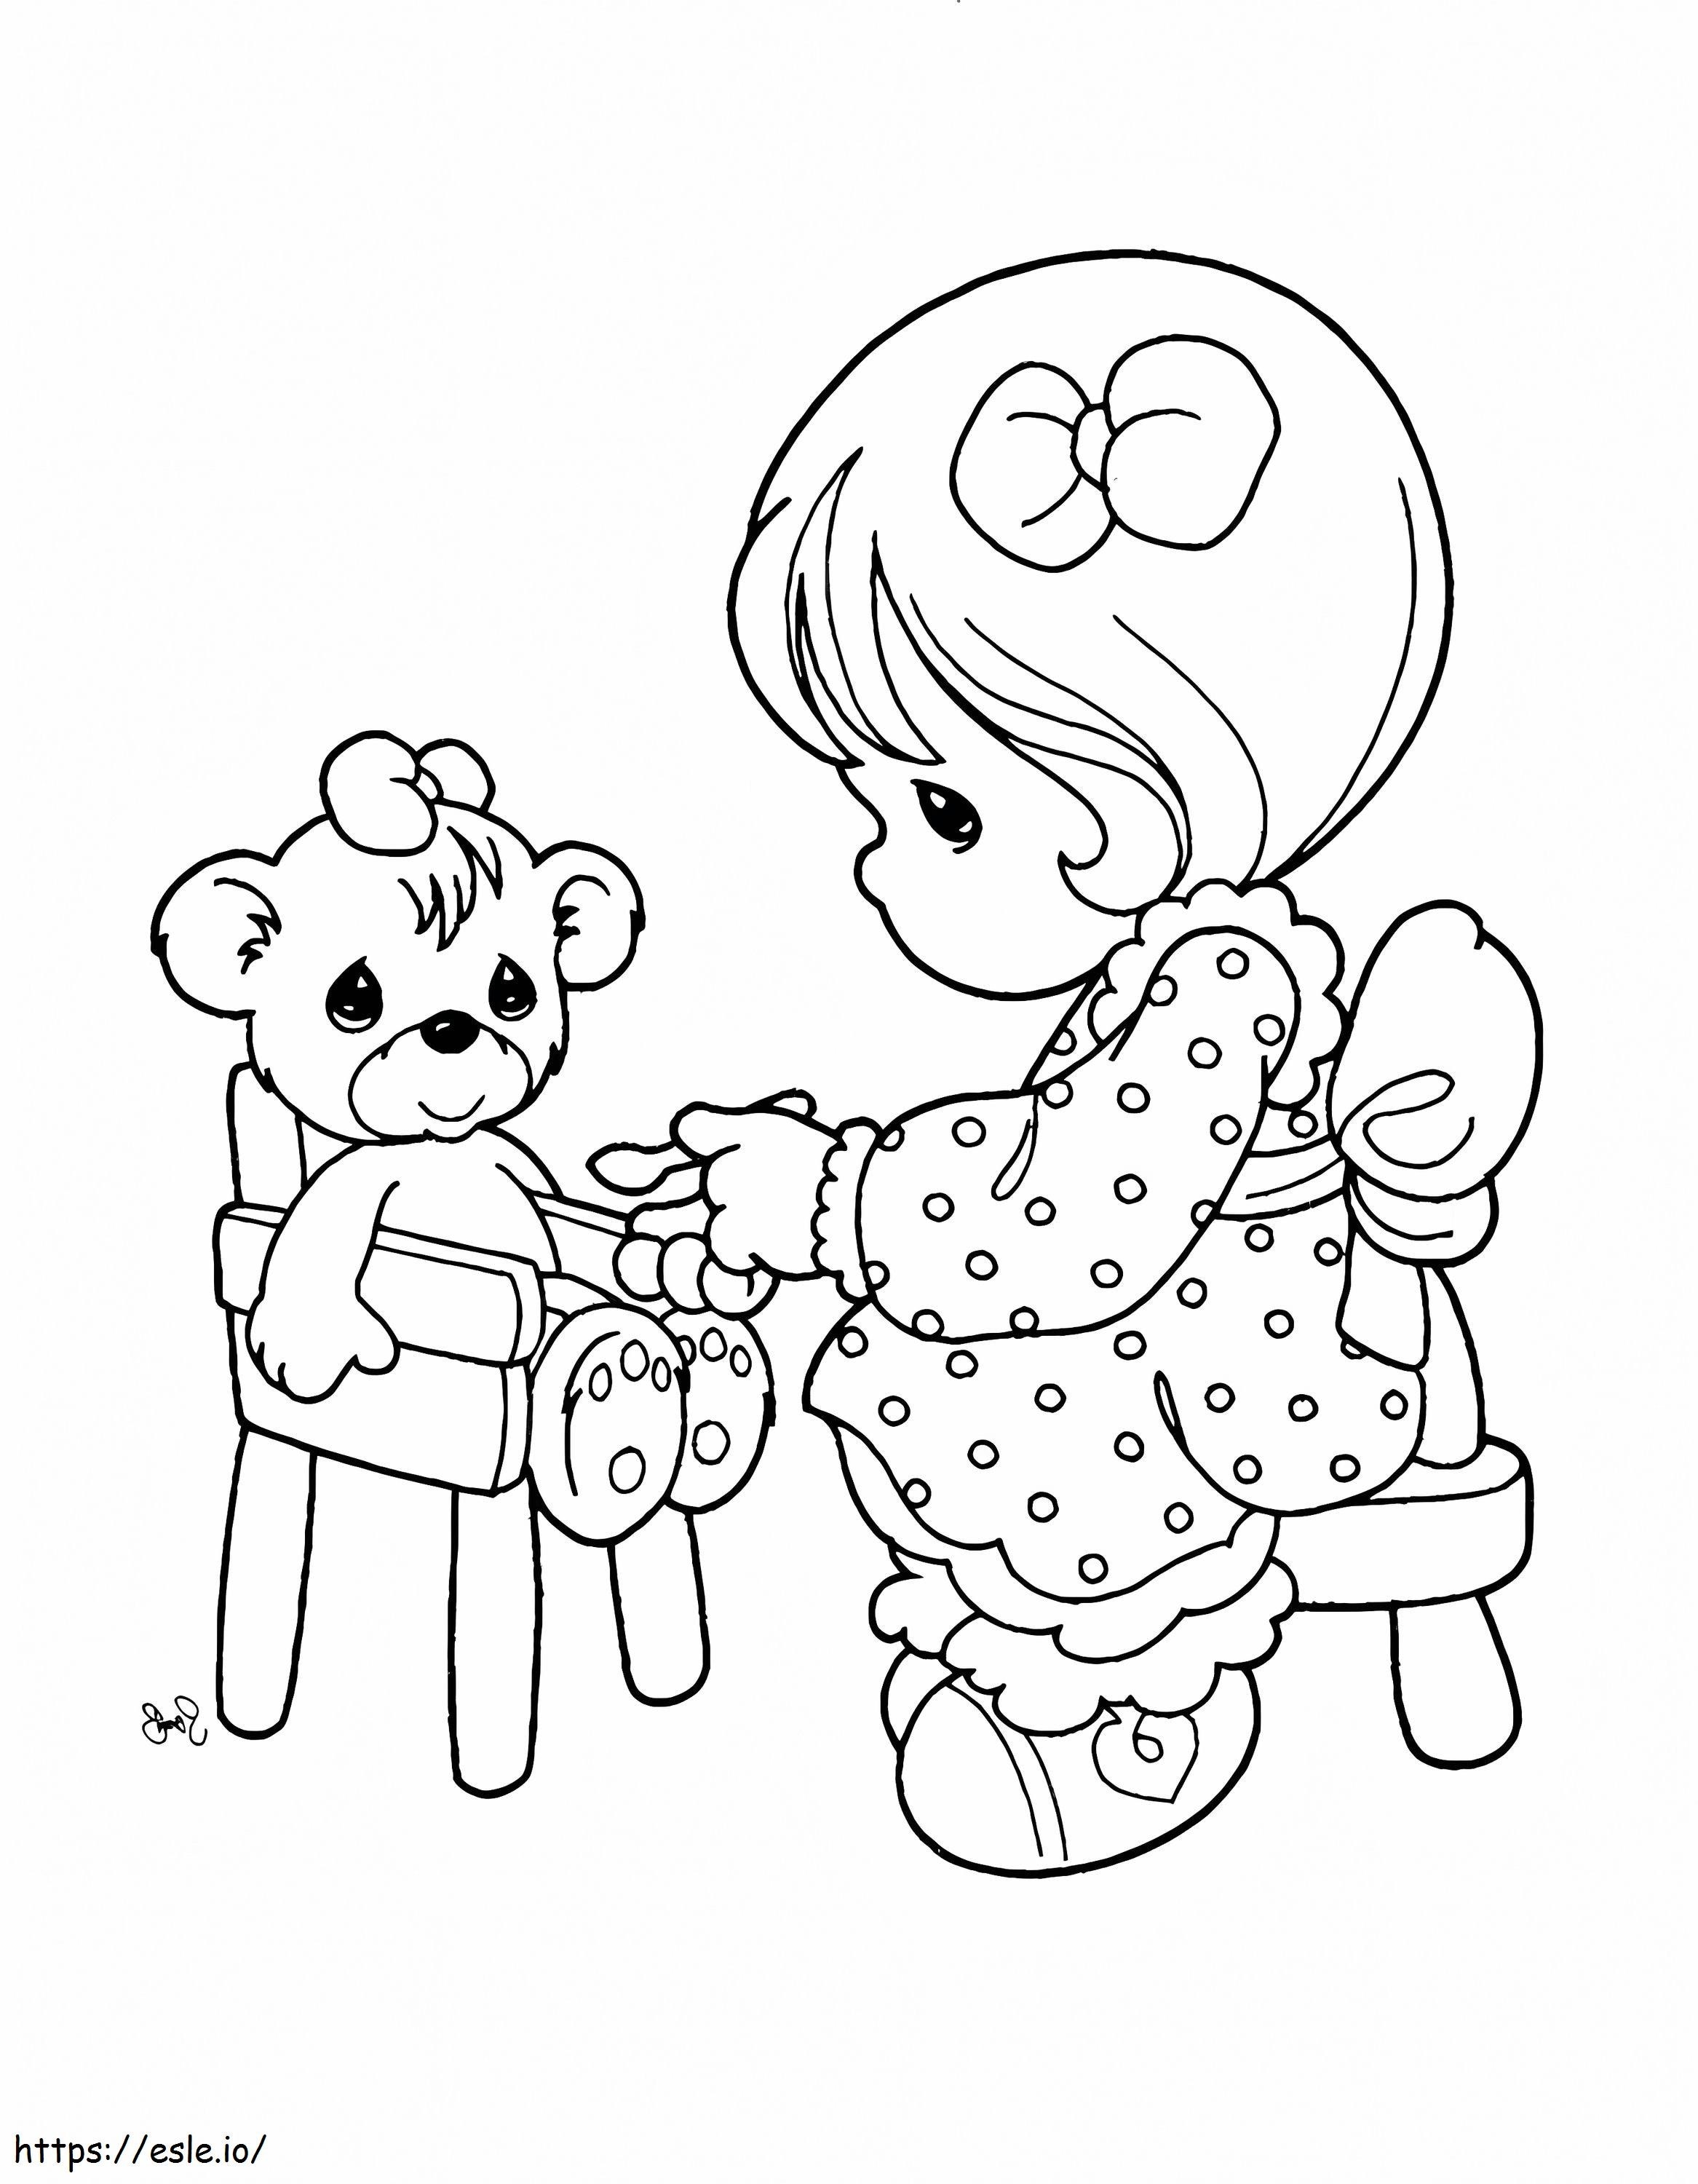 1574297799 Precious Moments Valentine Precious Moments Drawings Gallery ...